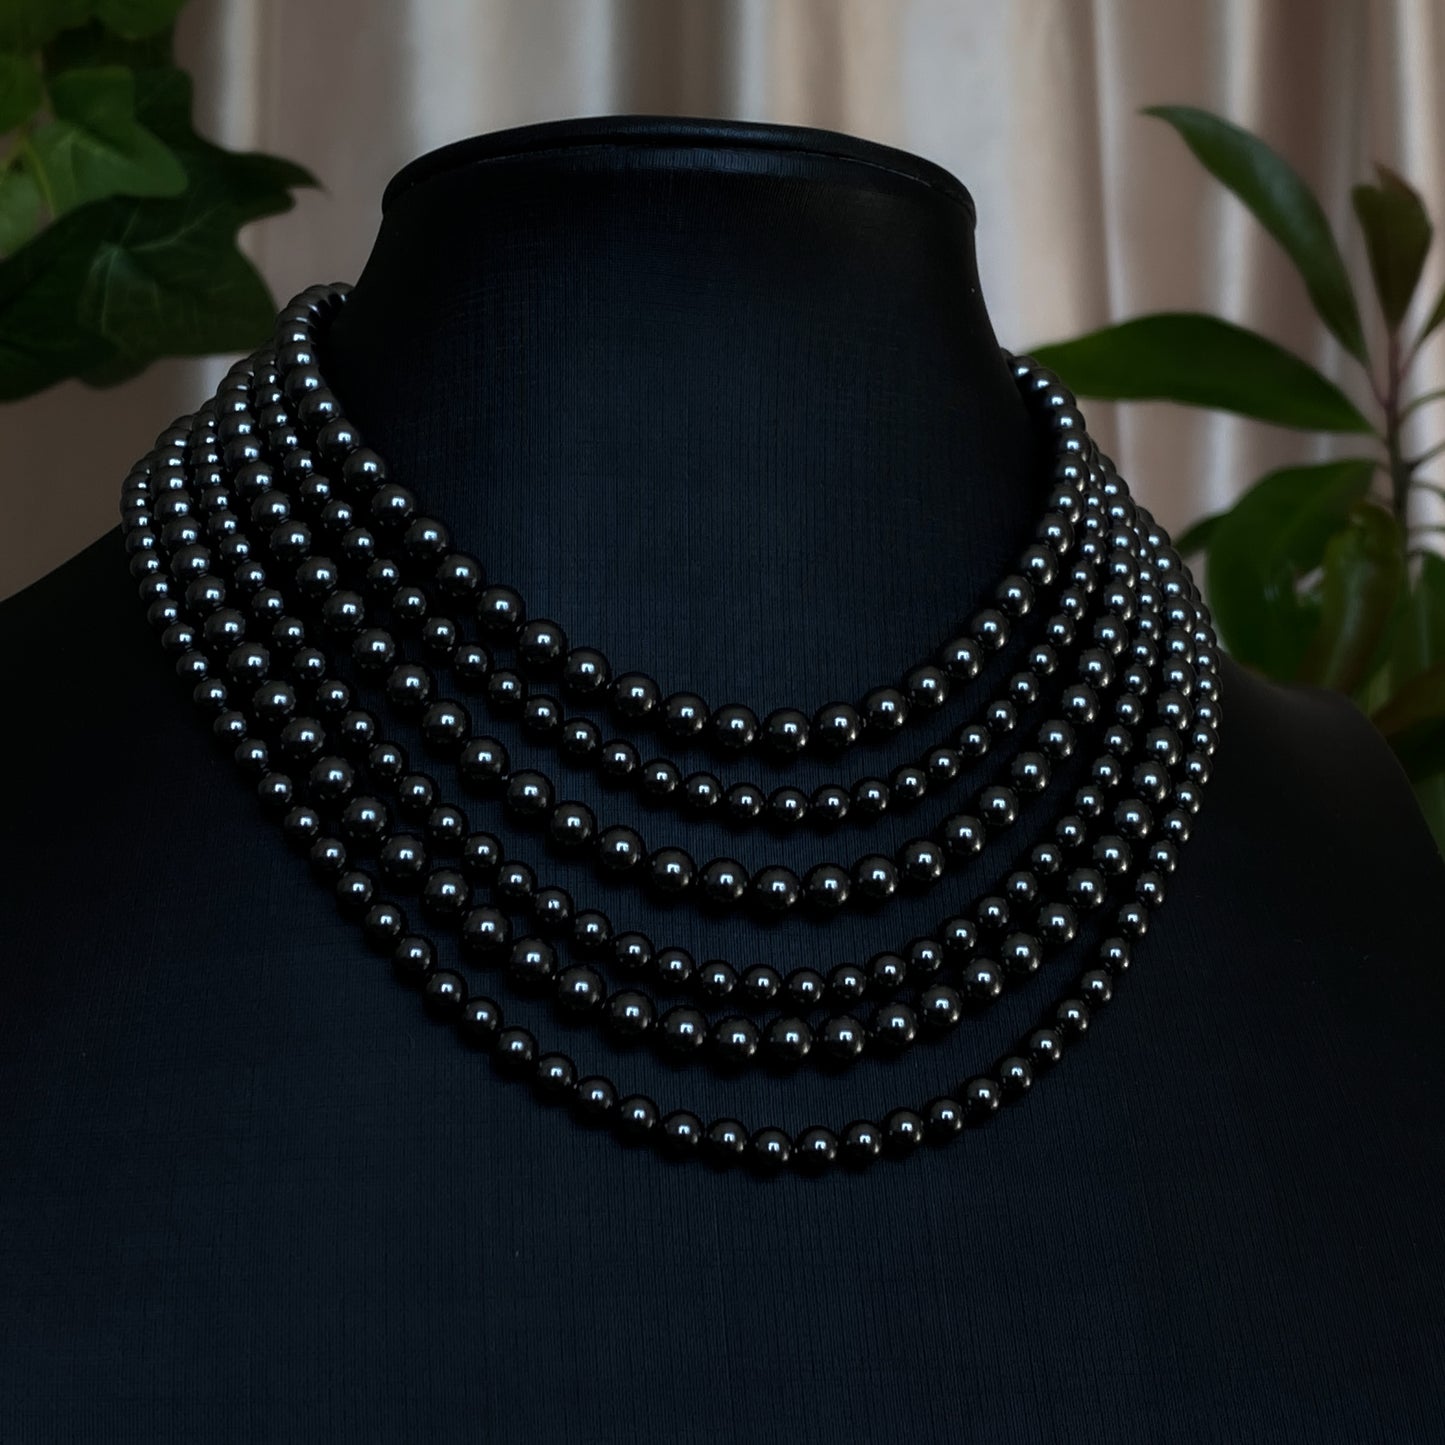 Tara ~ Dark Siren Layered Black Pearl Choker with Glass Pearls, Antique Silver Shells and Stainless Steel